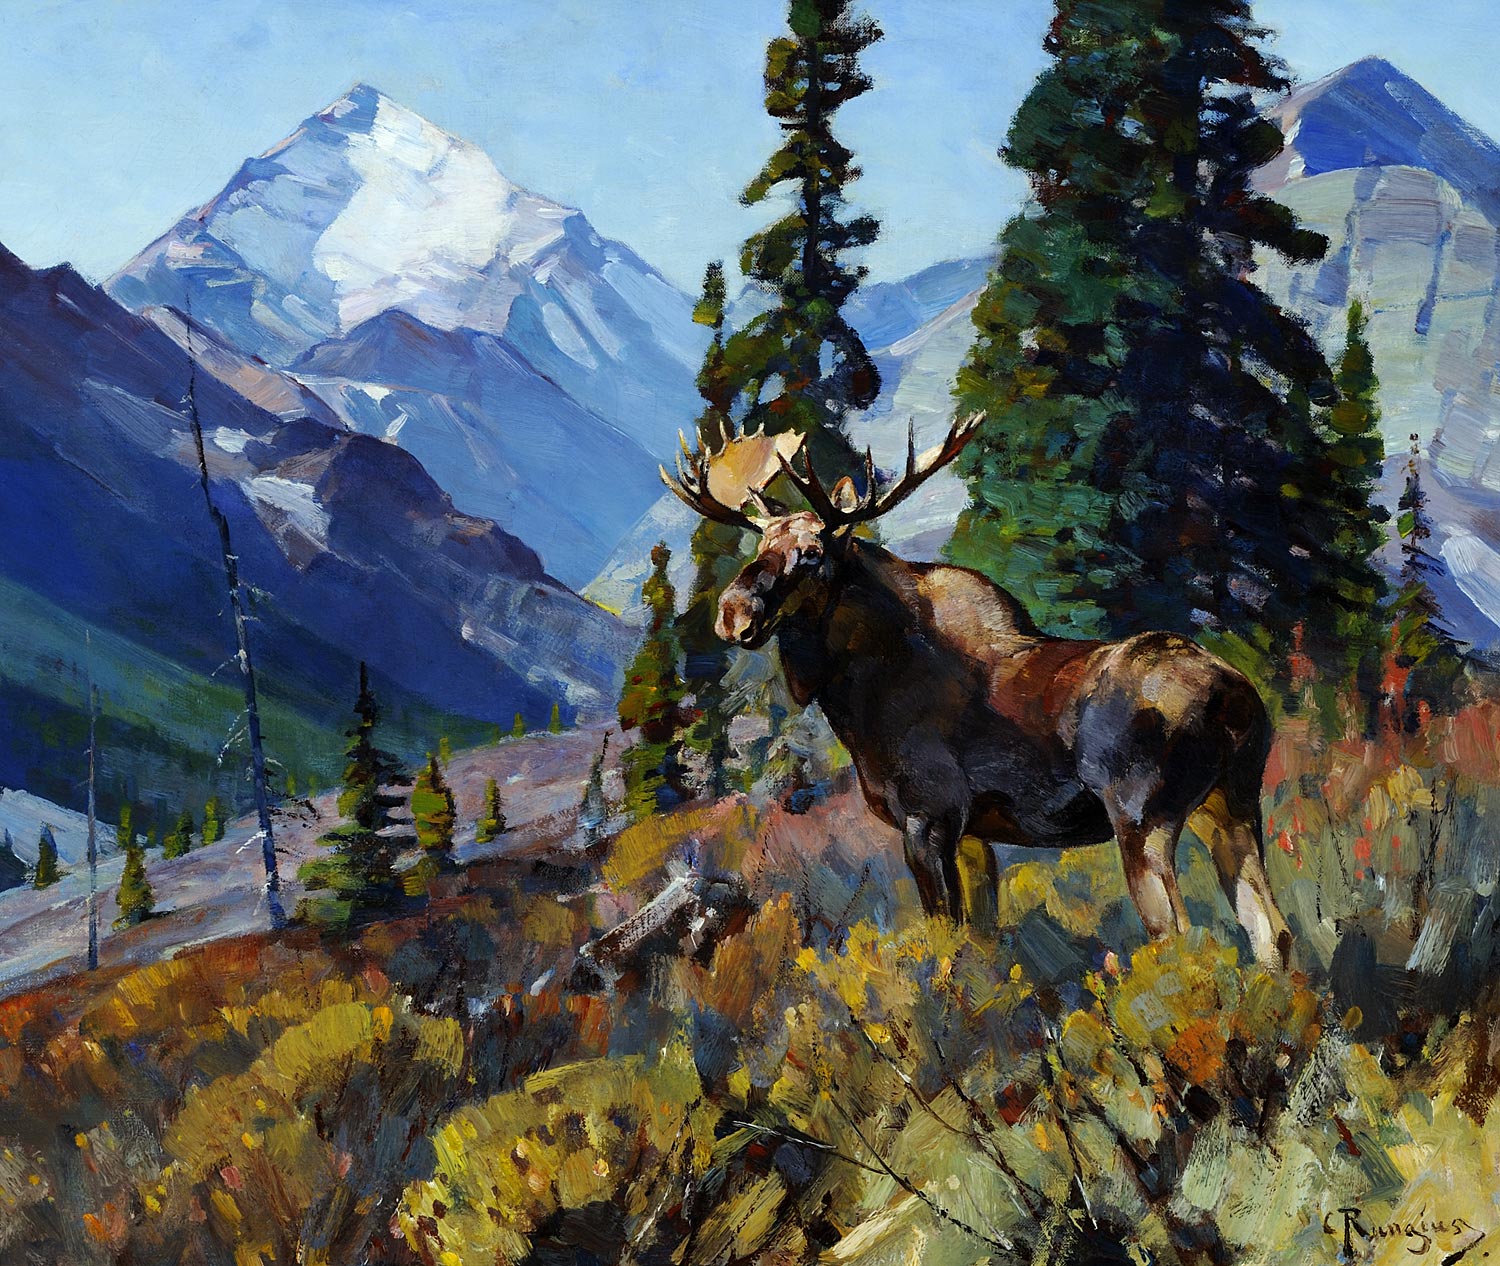 Moose on the Head of Ram River by Carl Rungius - c. 1940s - 25 x 30 inches The National Museum of Wildlife Art